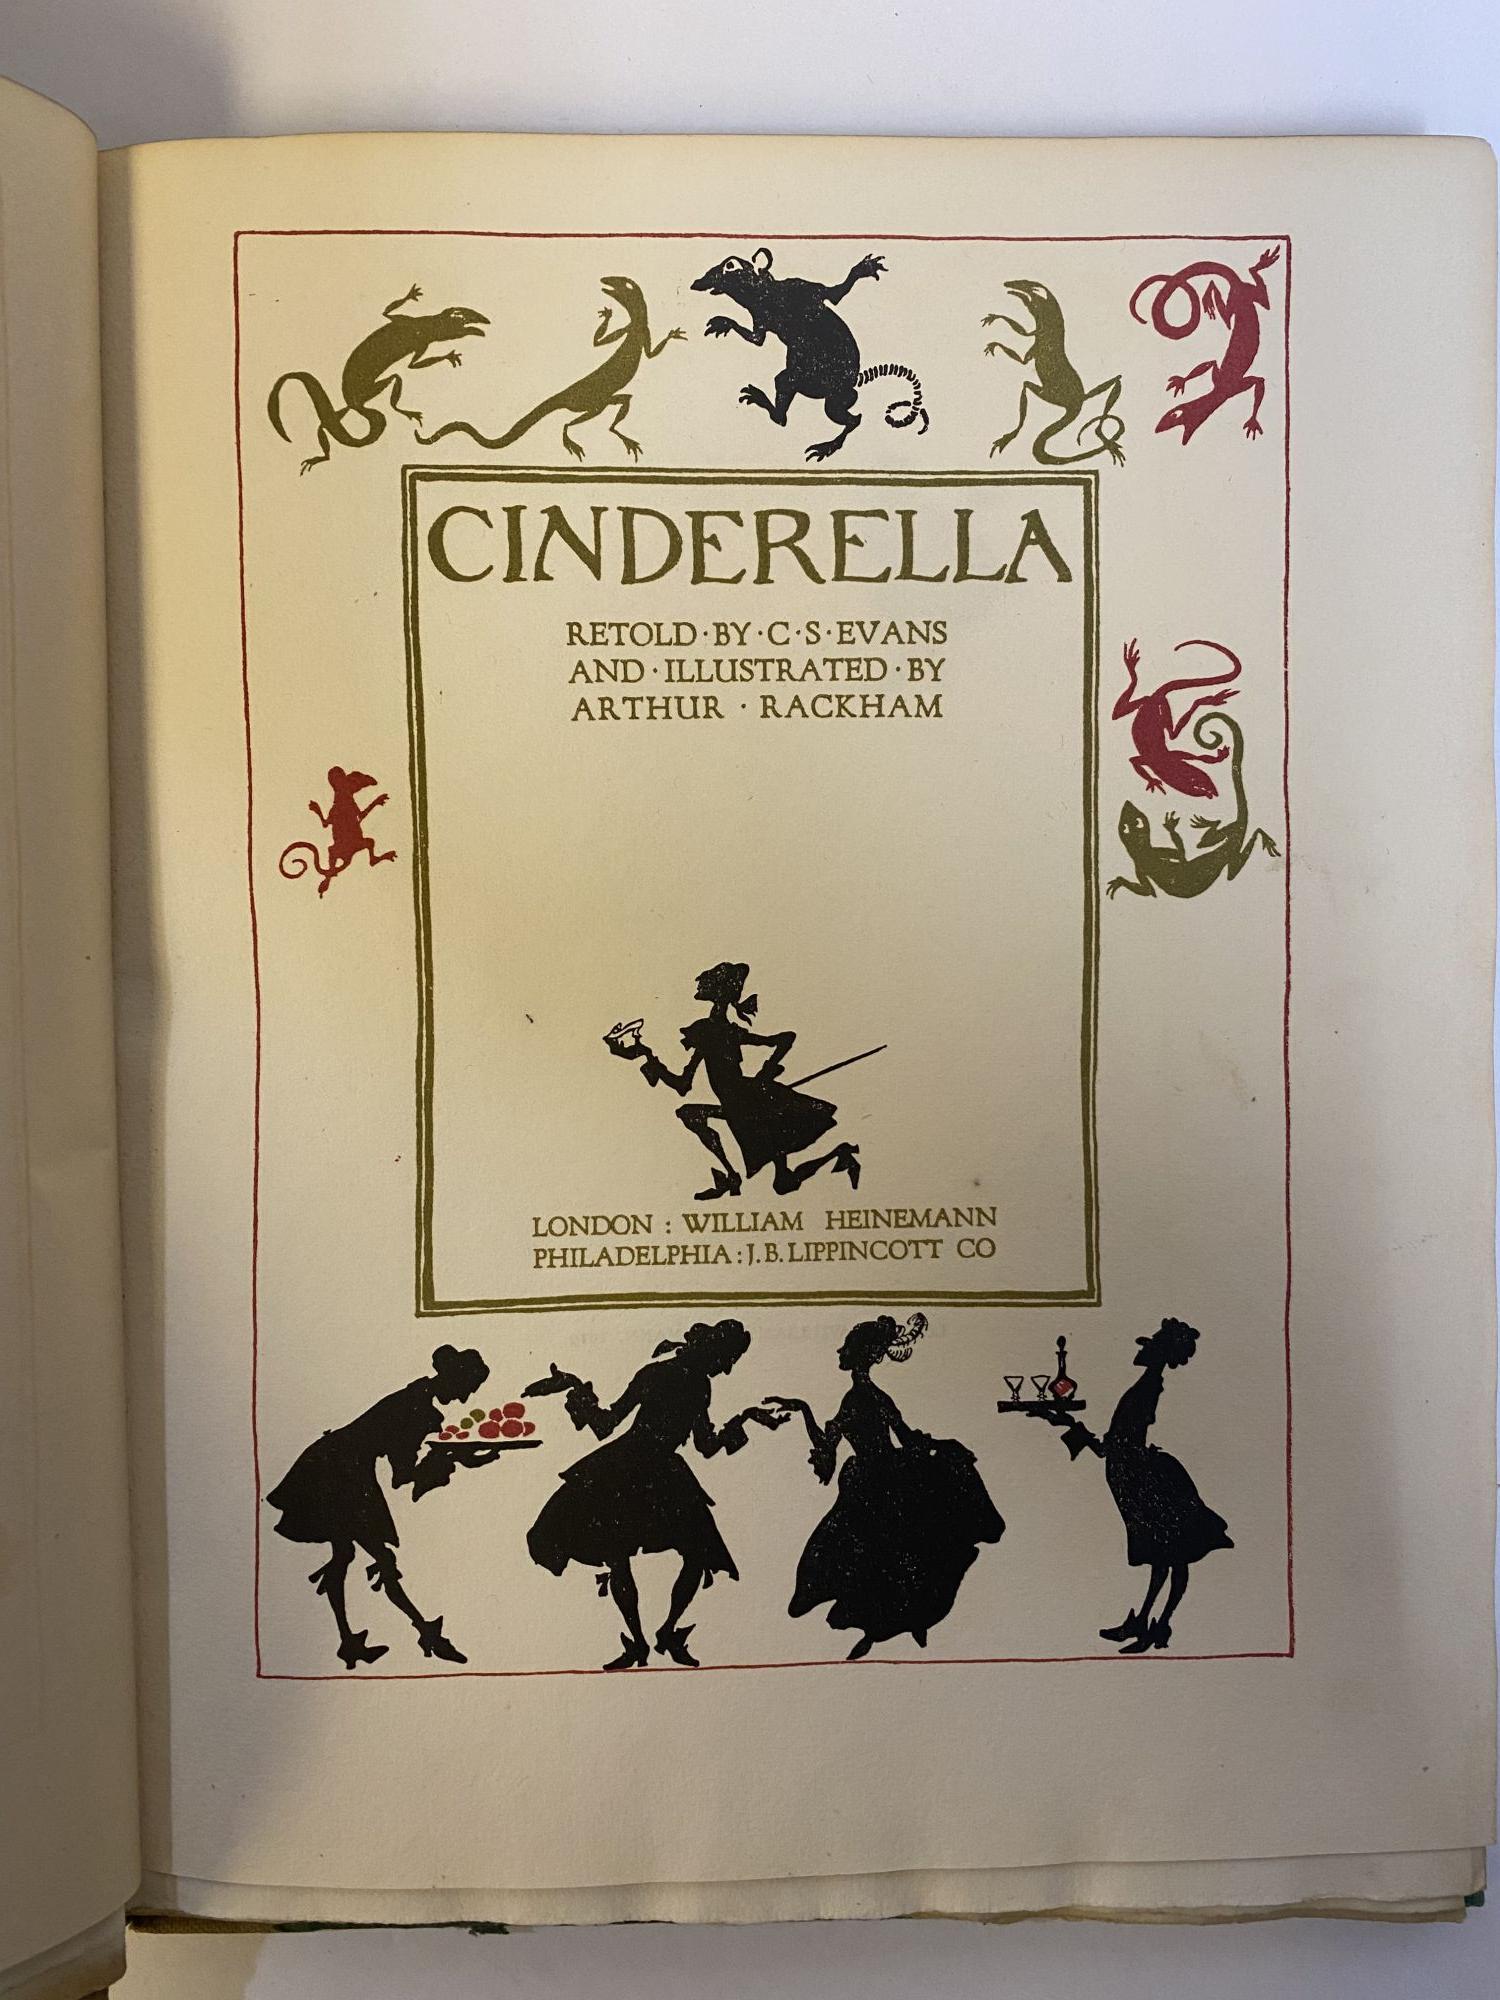 Product Image for CINDERELLA [Signed]